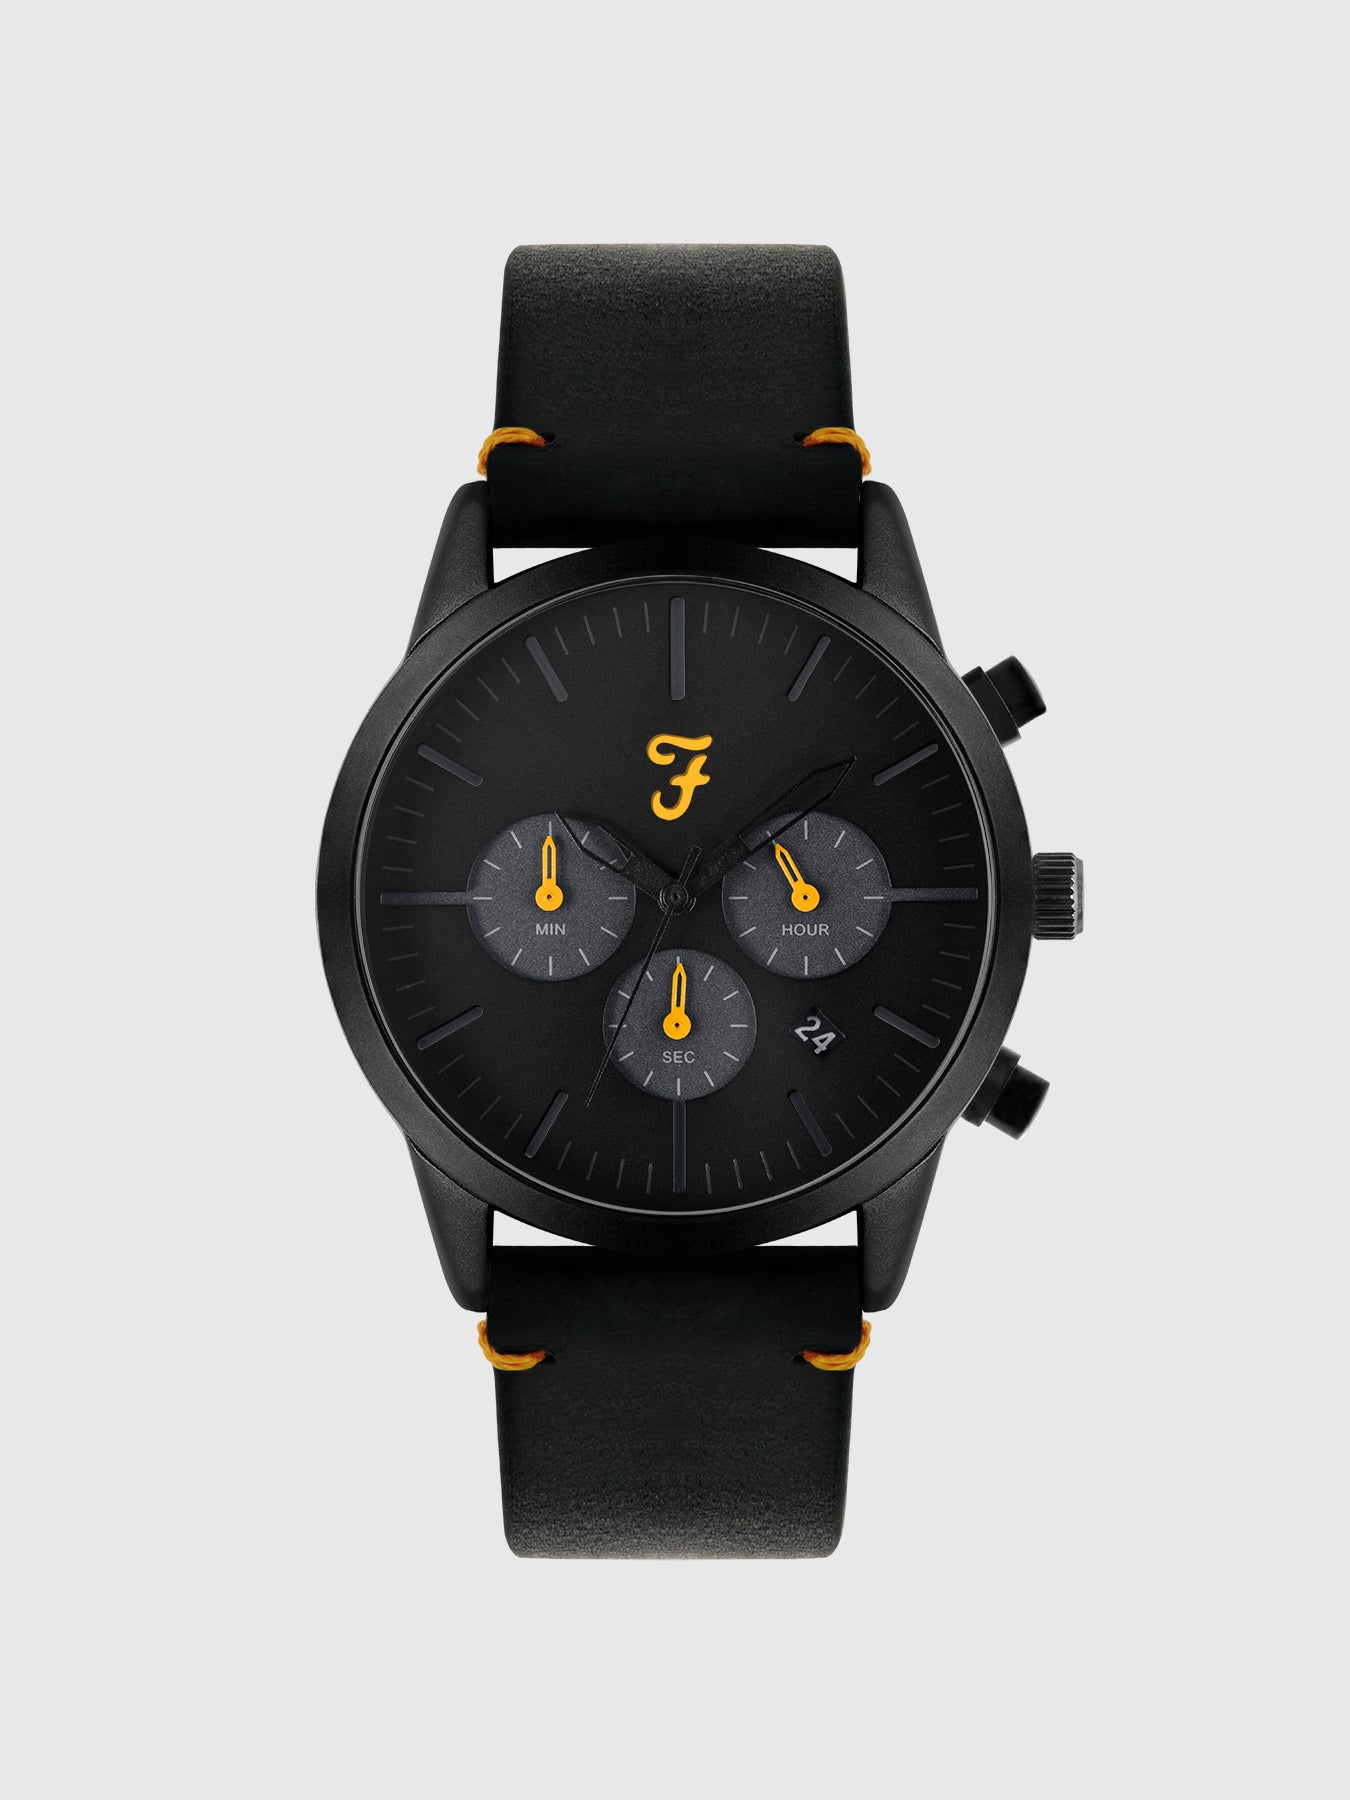 View Farah Chrono Watch With Leather Strap In Deep Black information